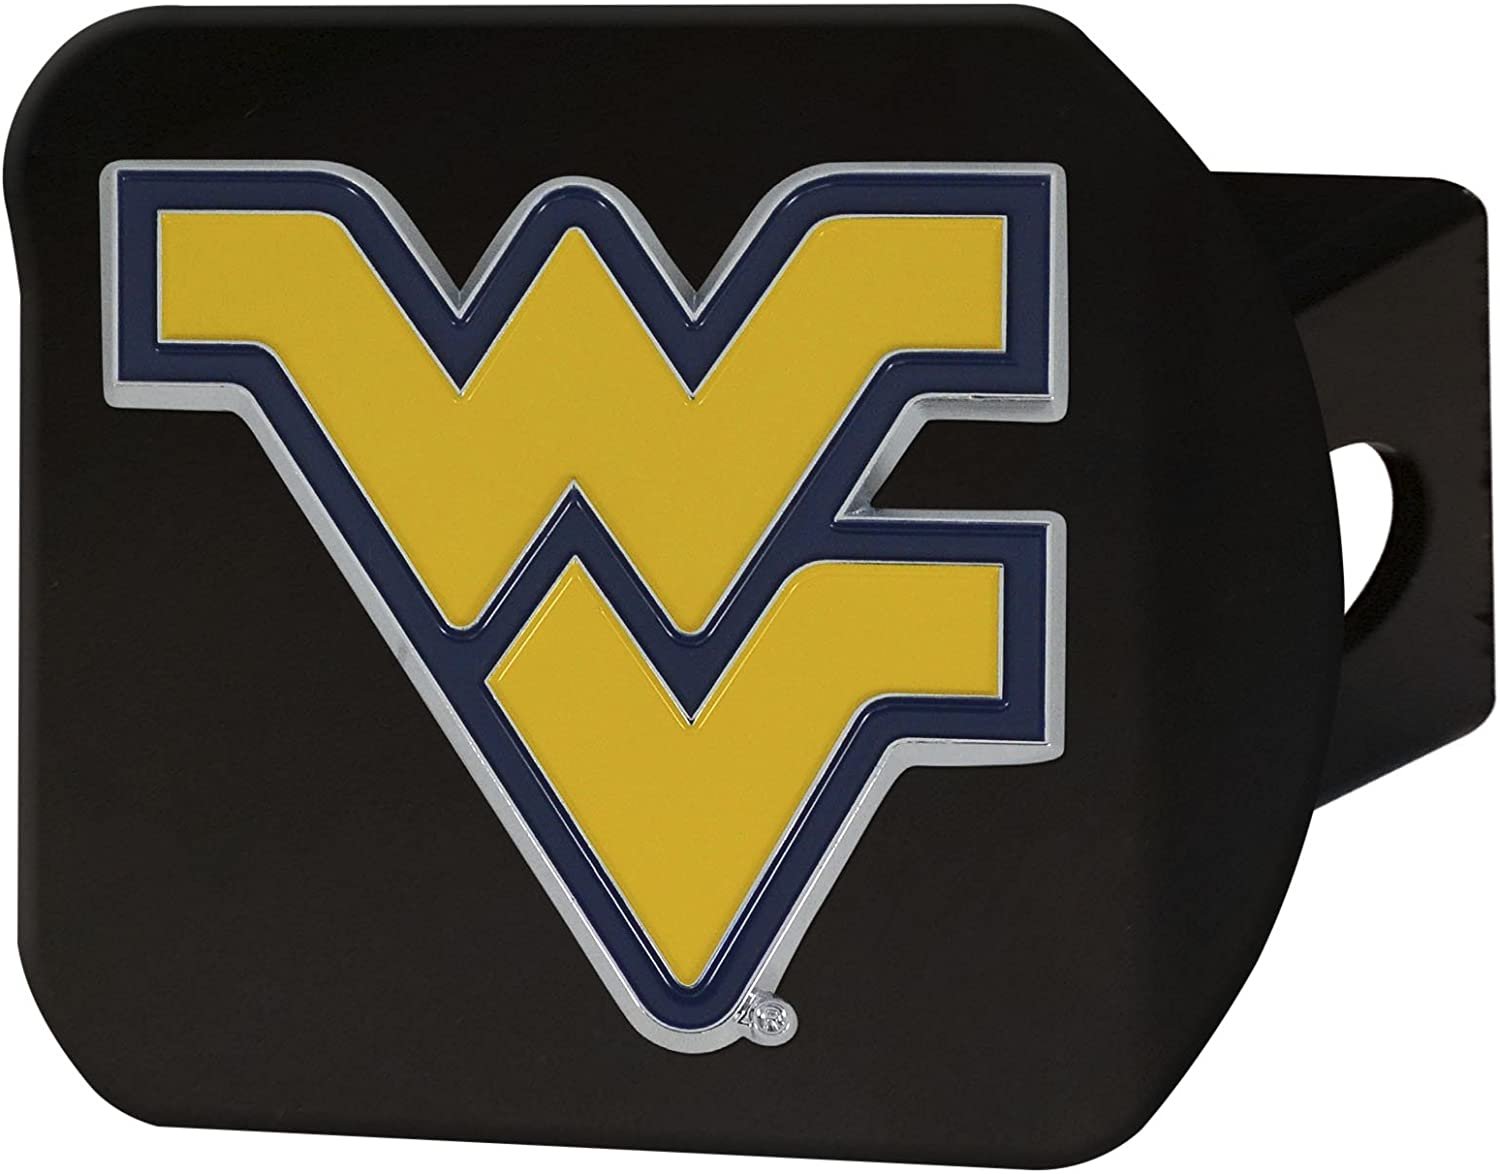 West Virginia Mountaineers Solid Metal Black Hitch Cover with Color Metal Emblem 2 Inch Square Type III University of